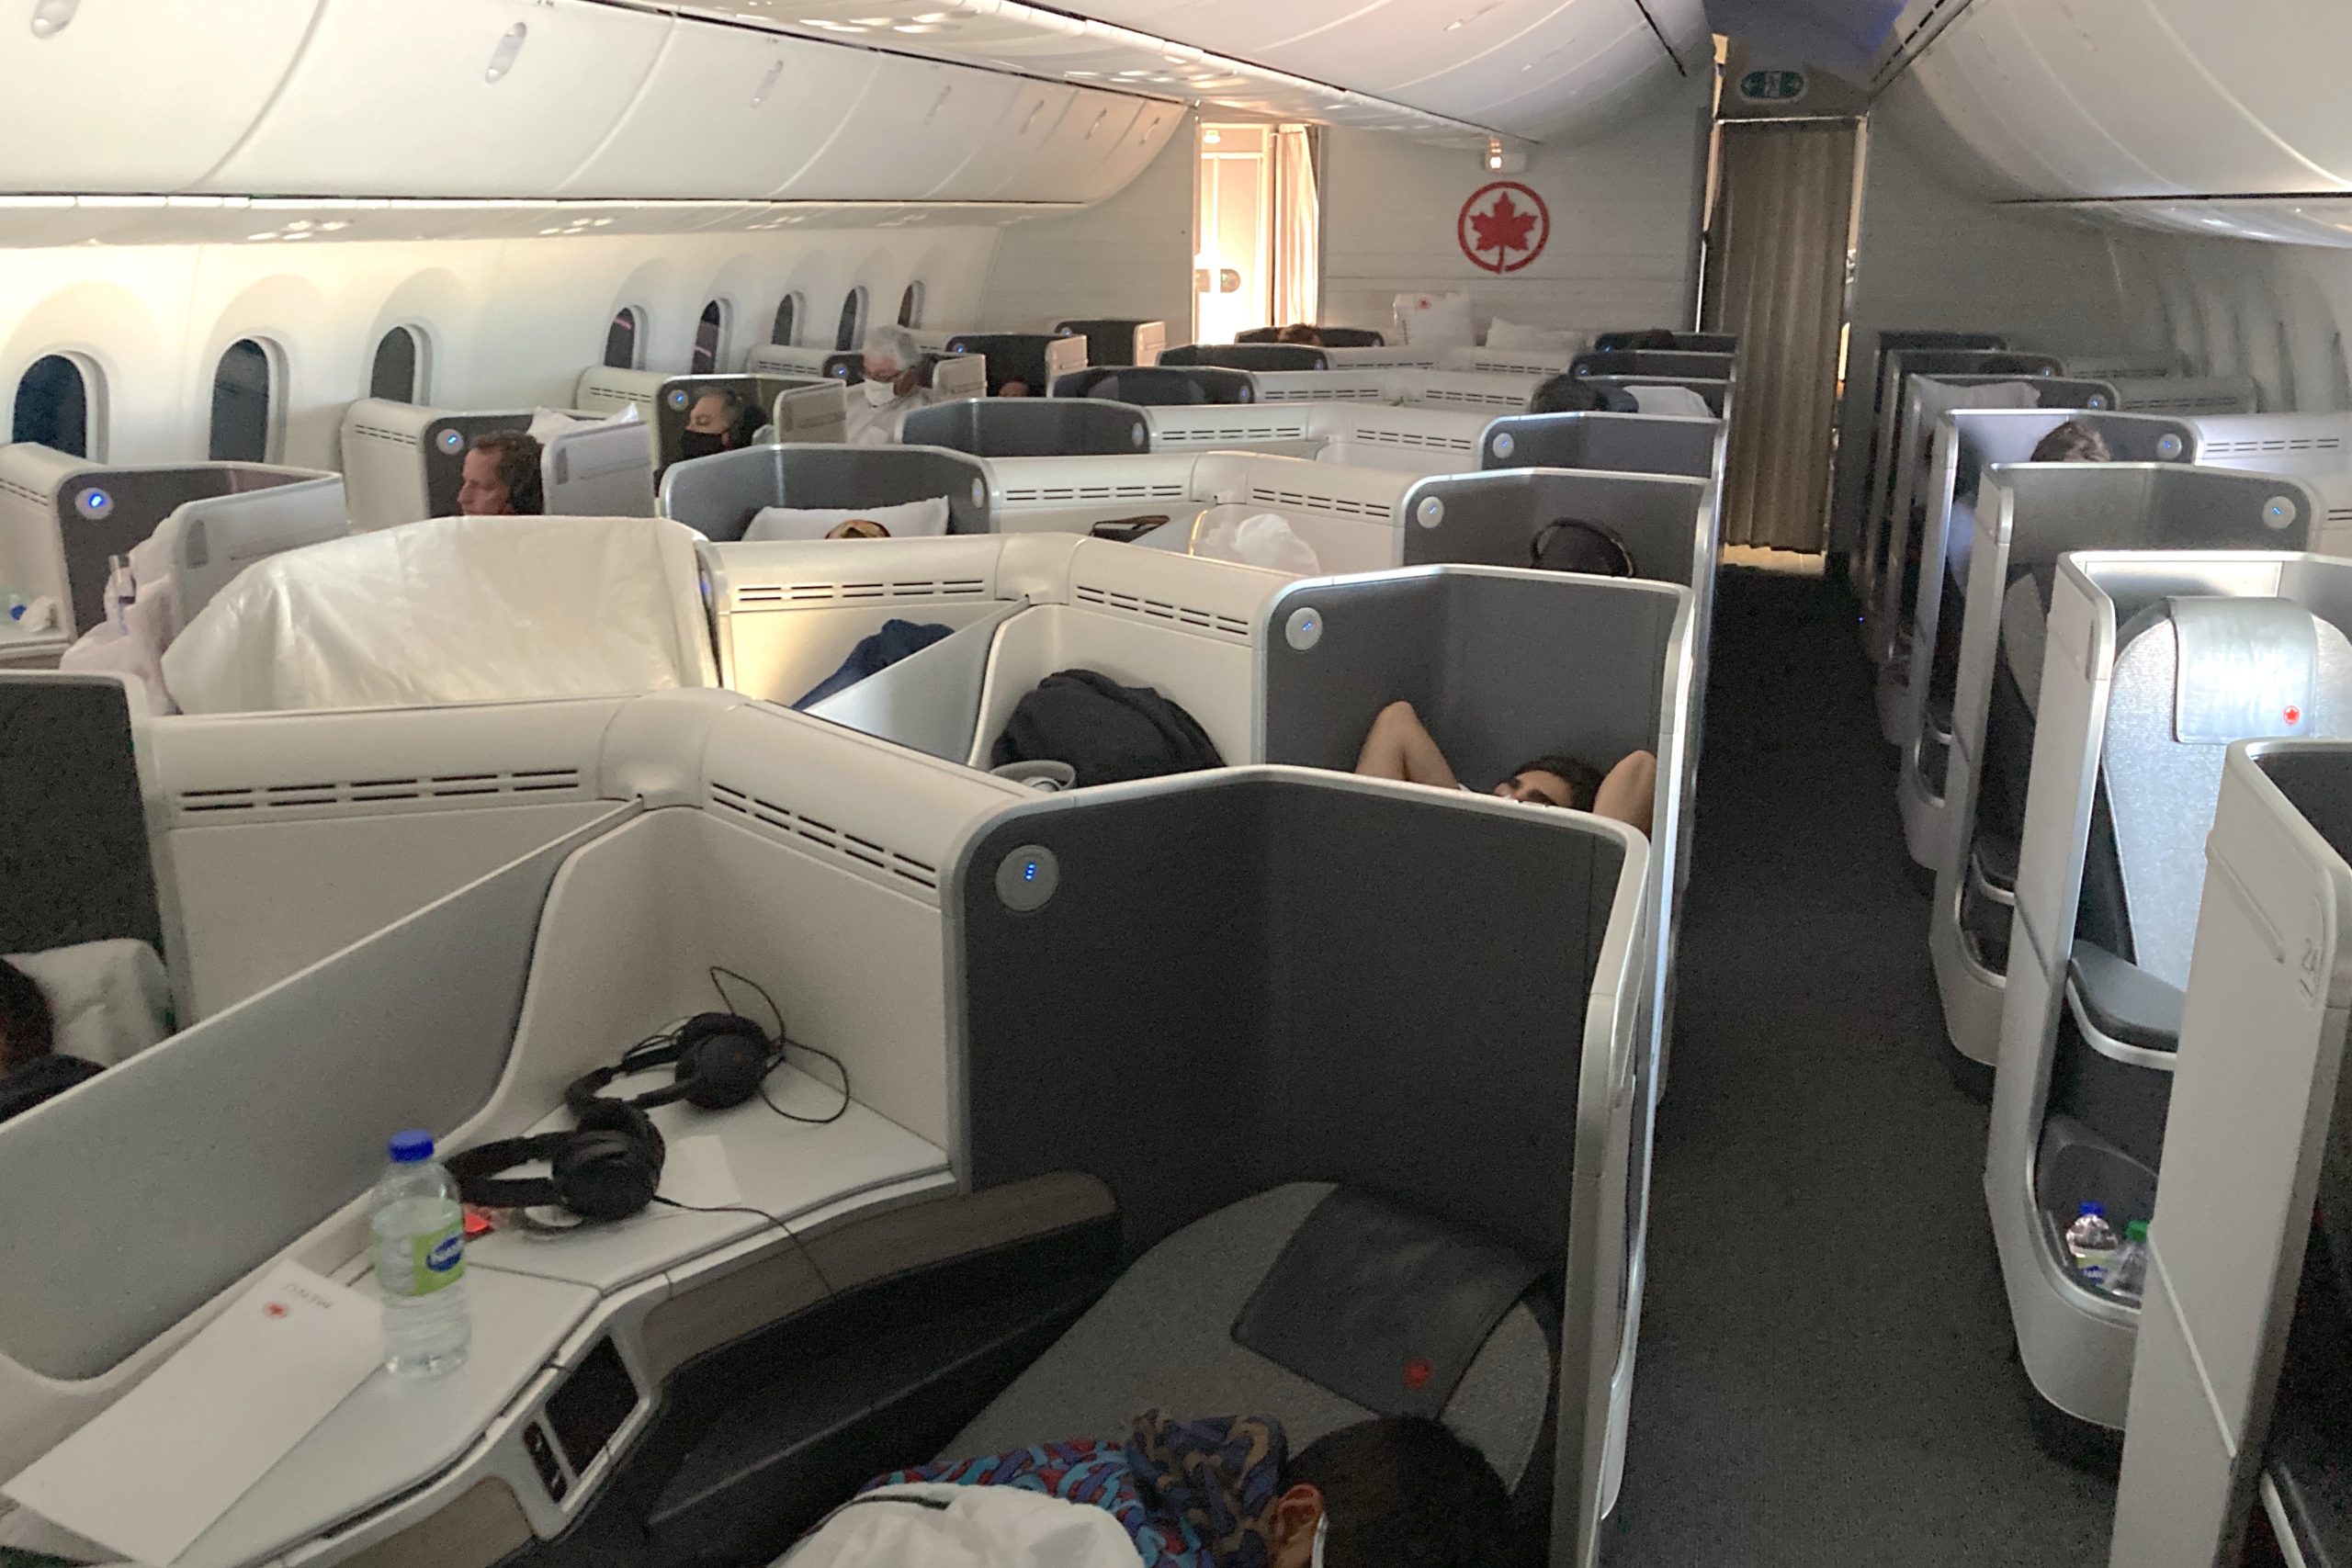 6. Comparison with Other Airlines' Business Class Seats